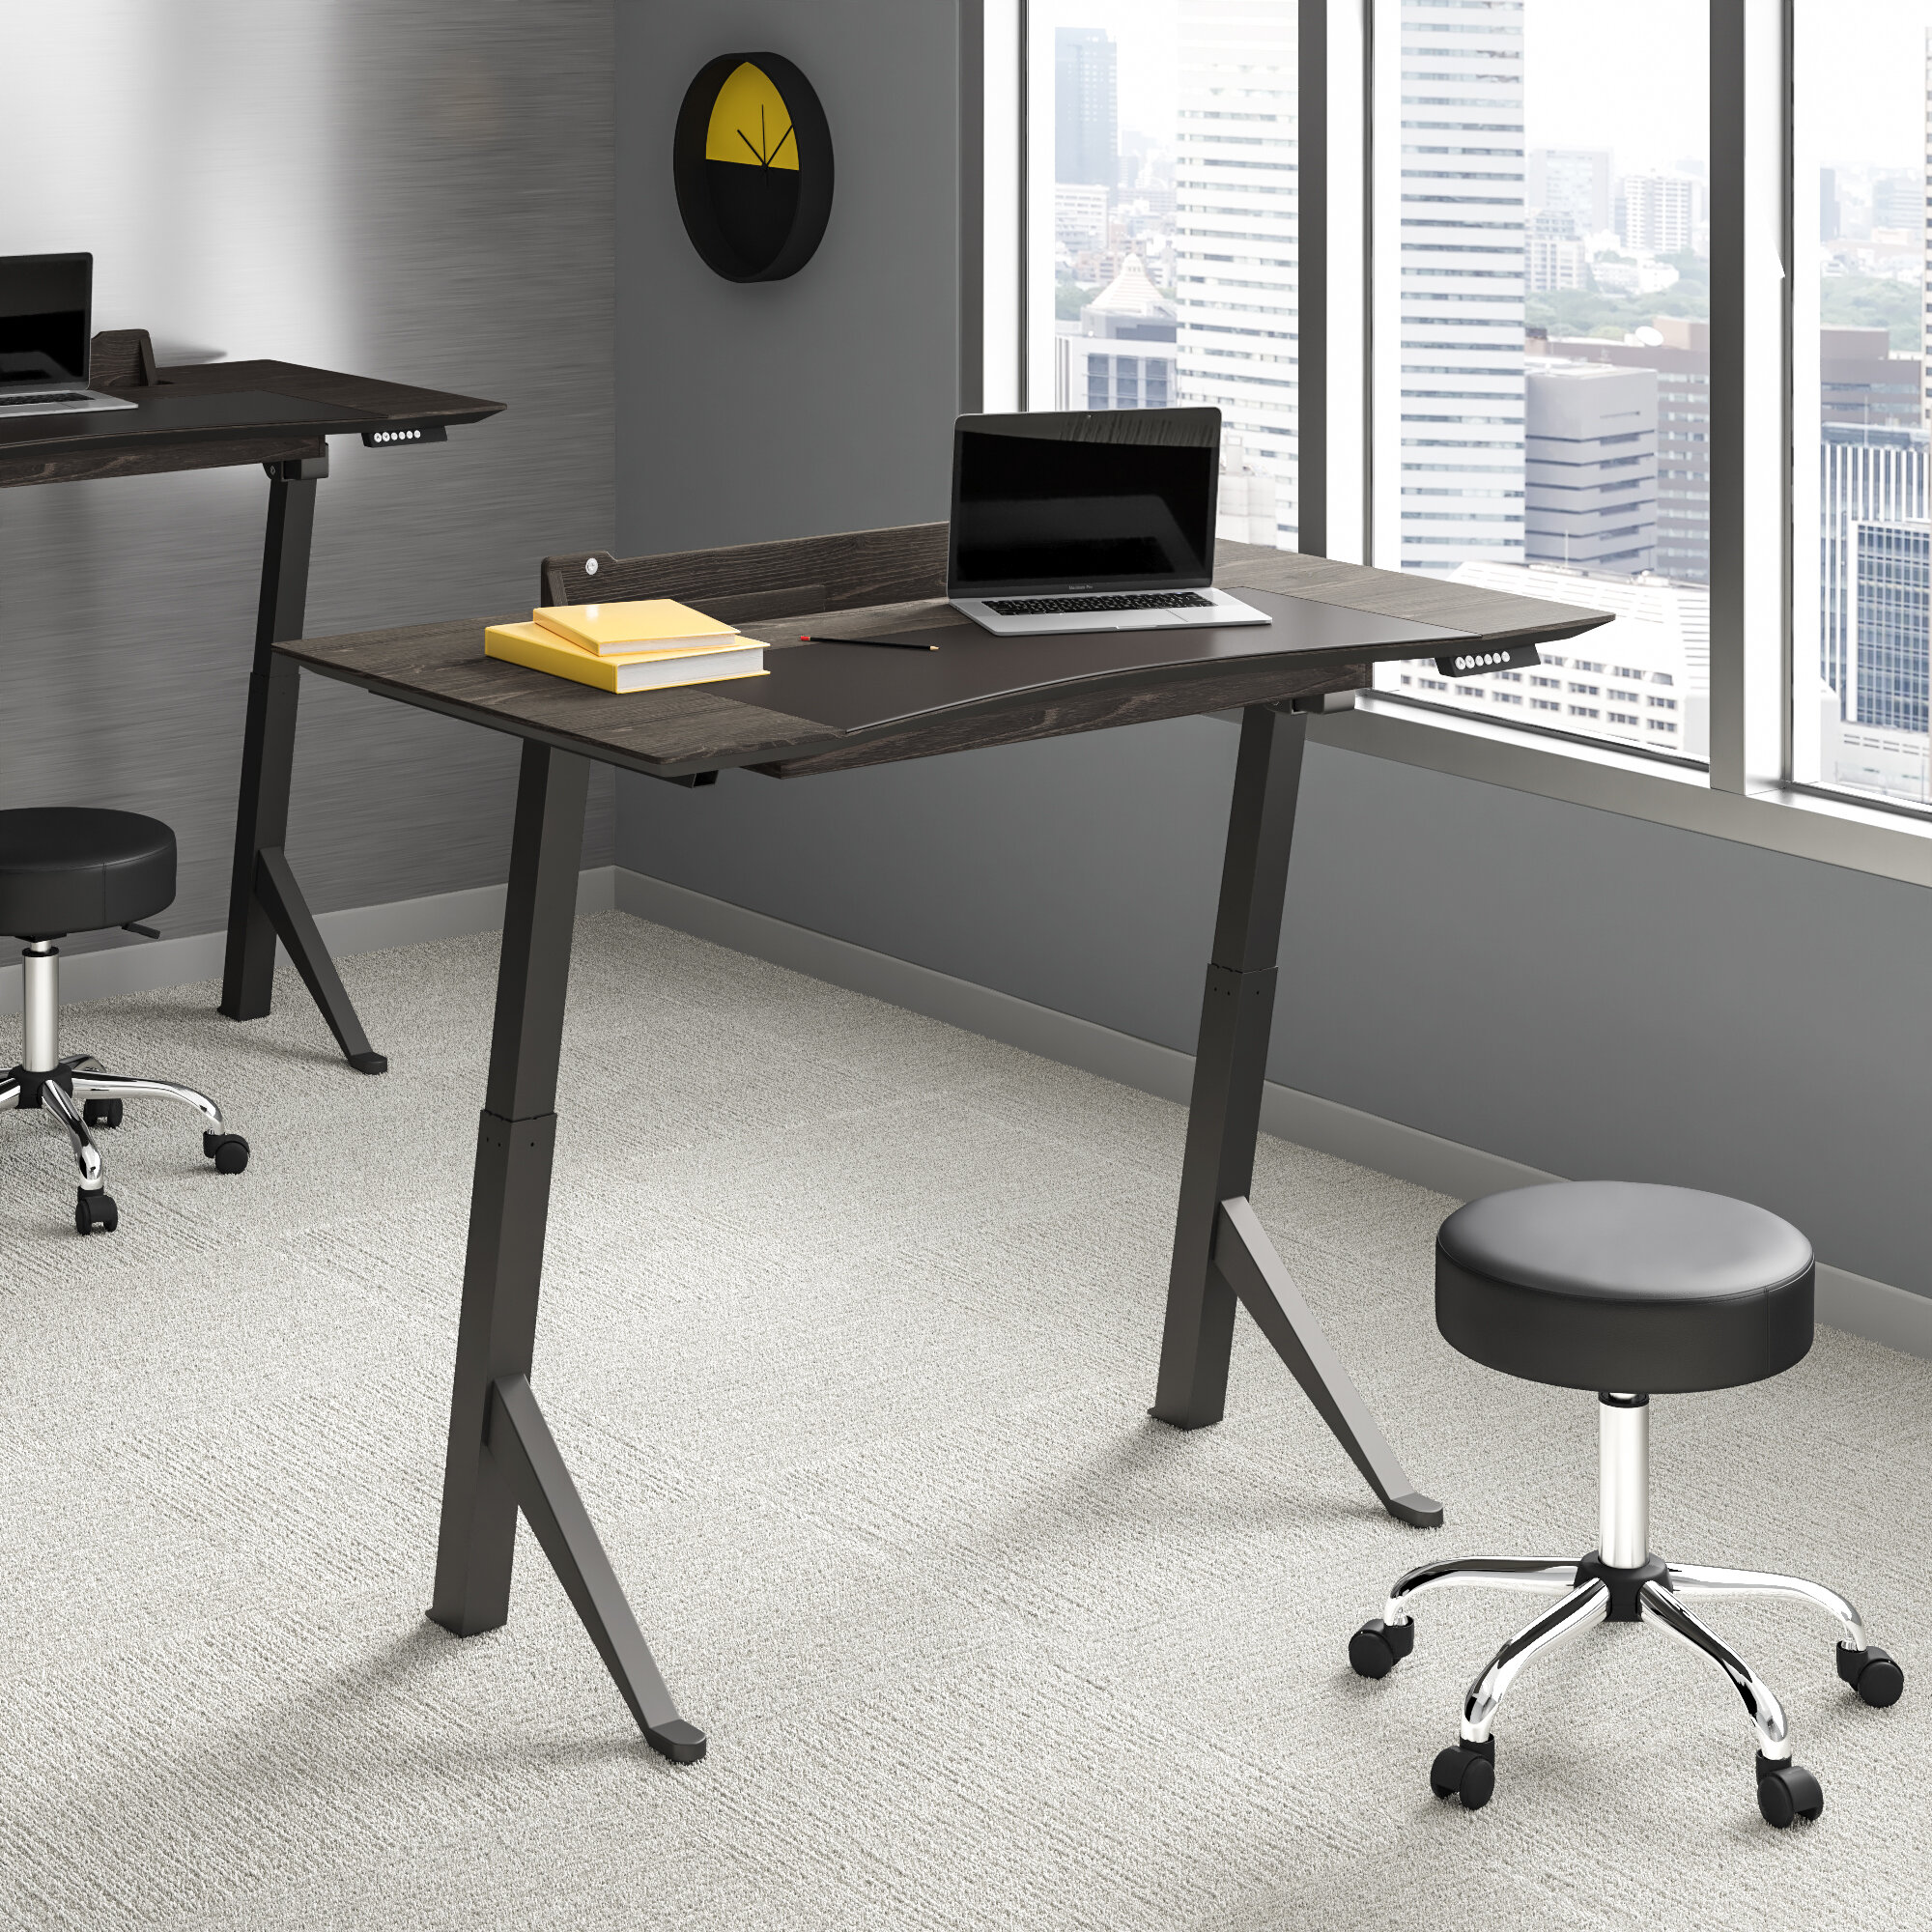 Built In Outlets Usb Desks Up To 80 Off This Week Only Wayfair